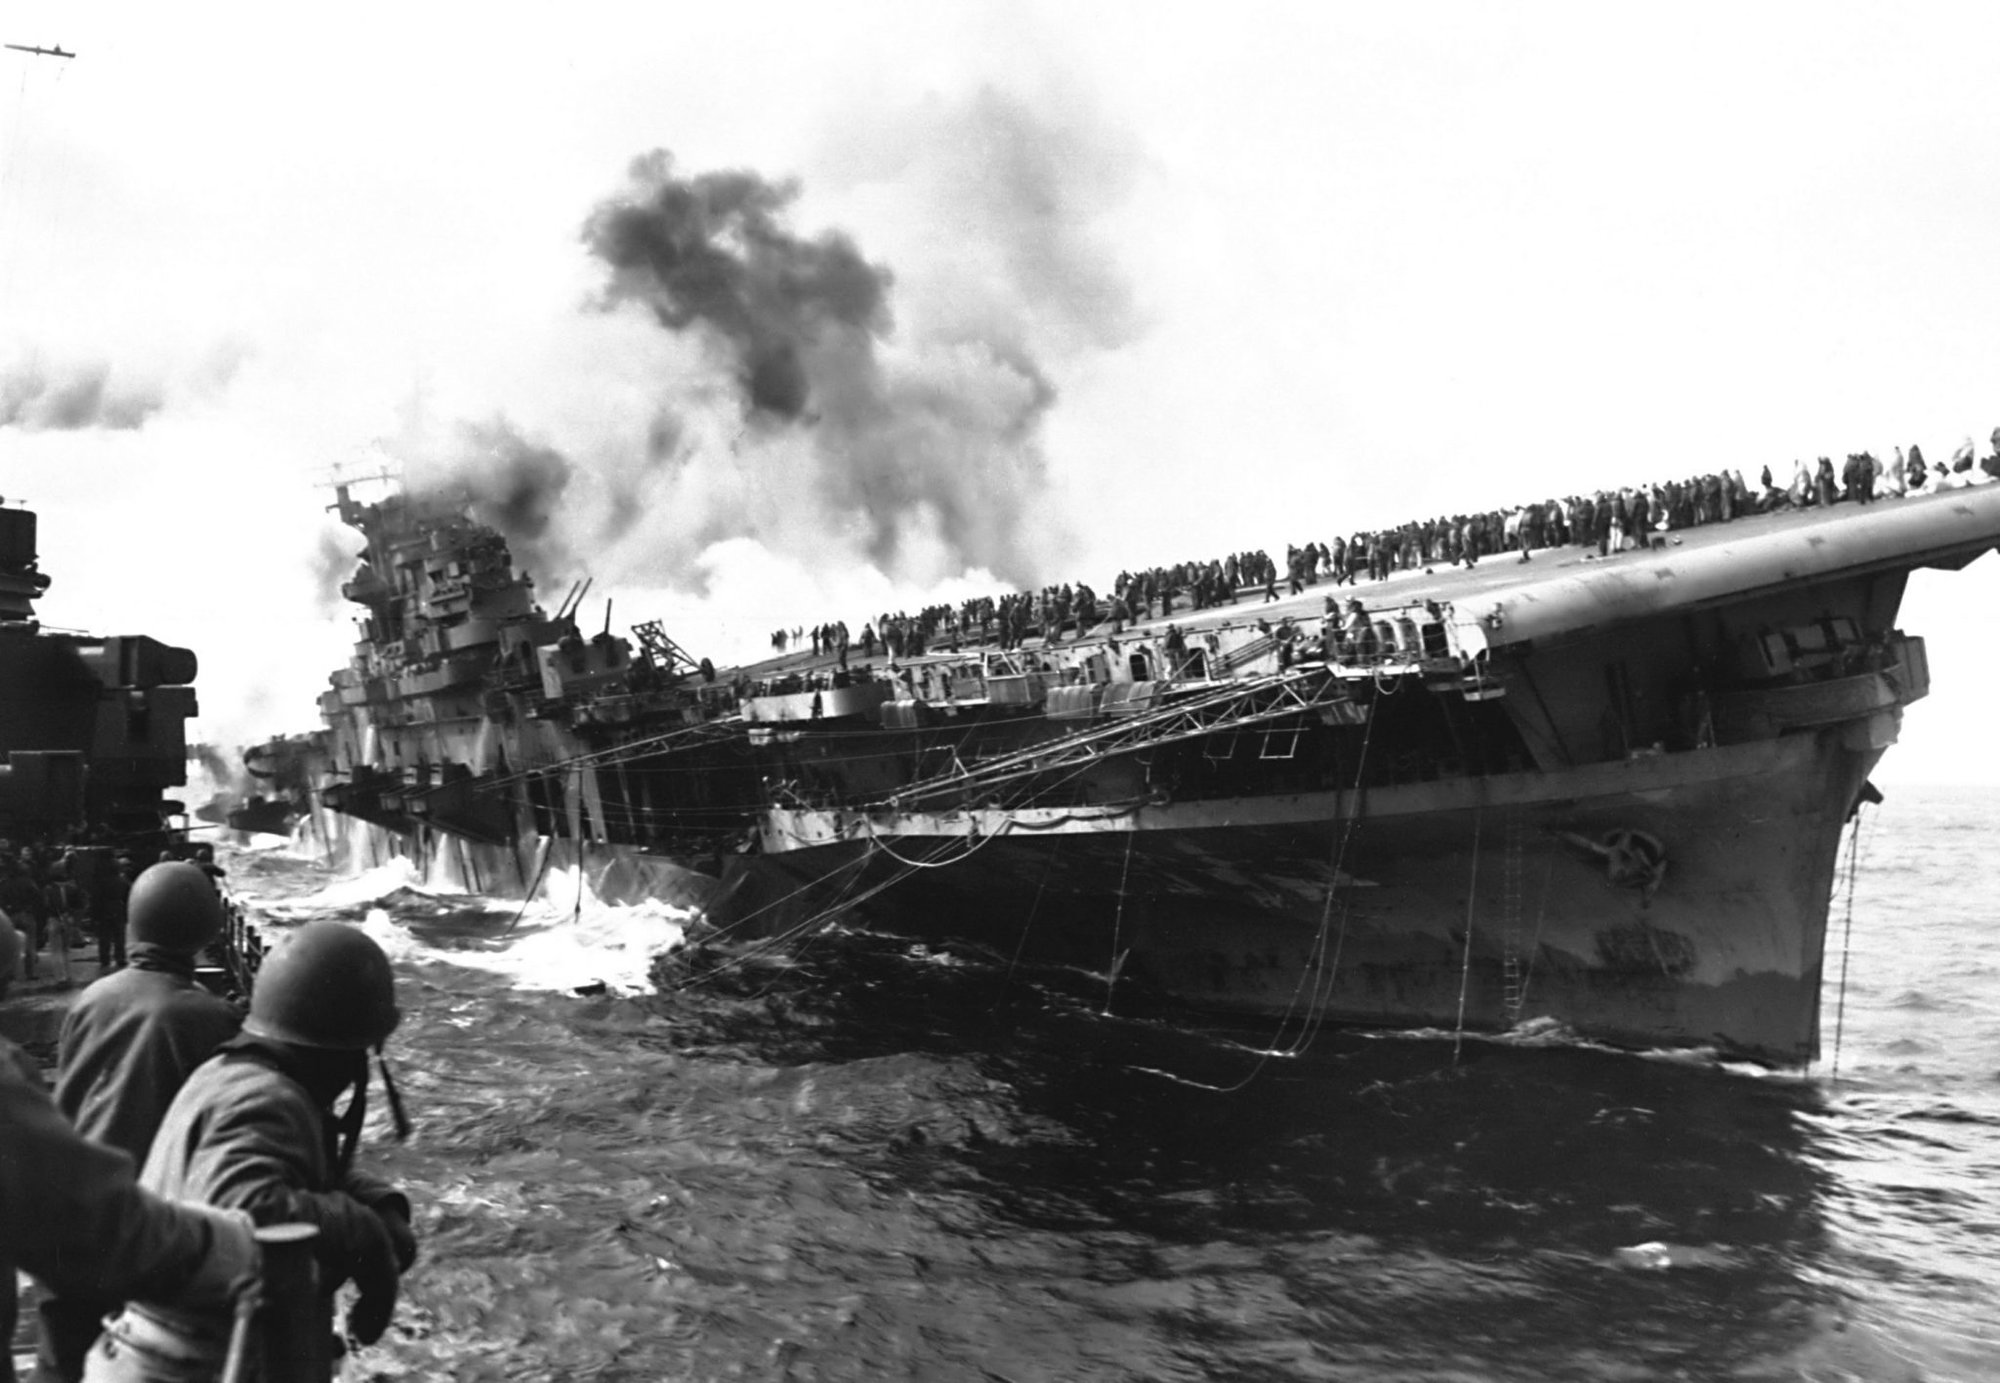 Pearl Harbor, kamikaze pilot interview, Coffee or Die